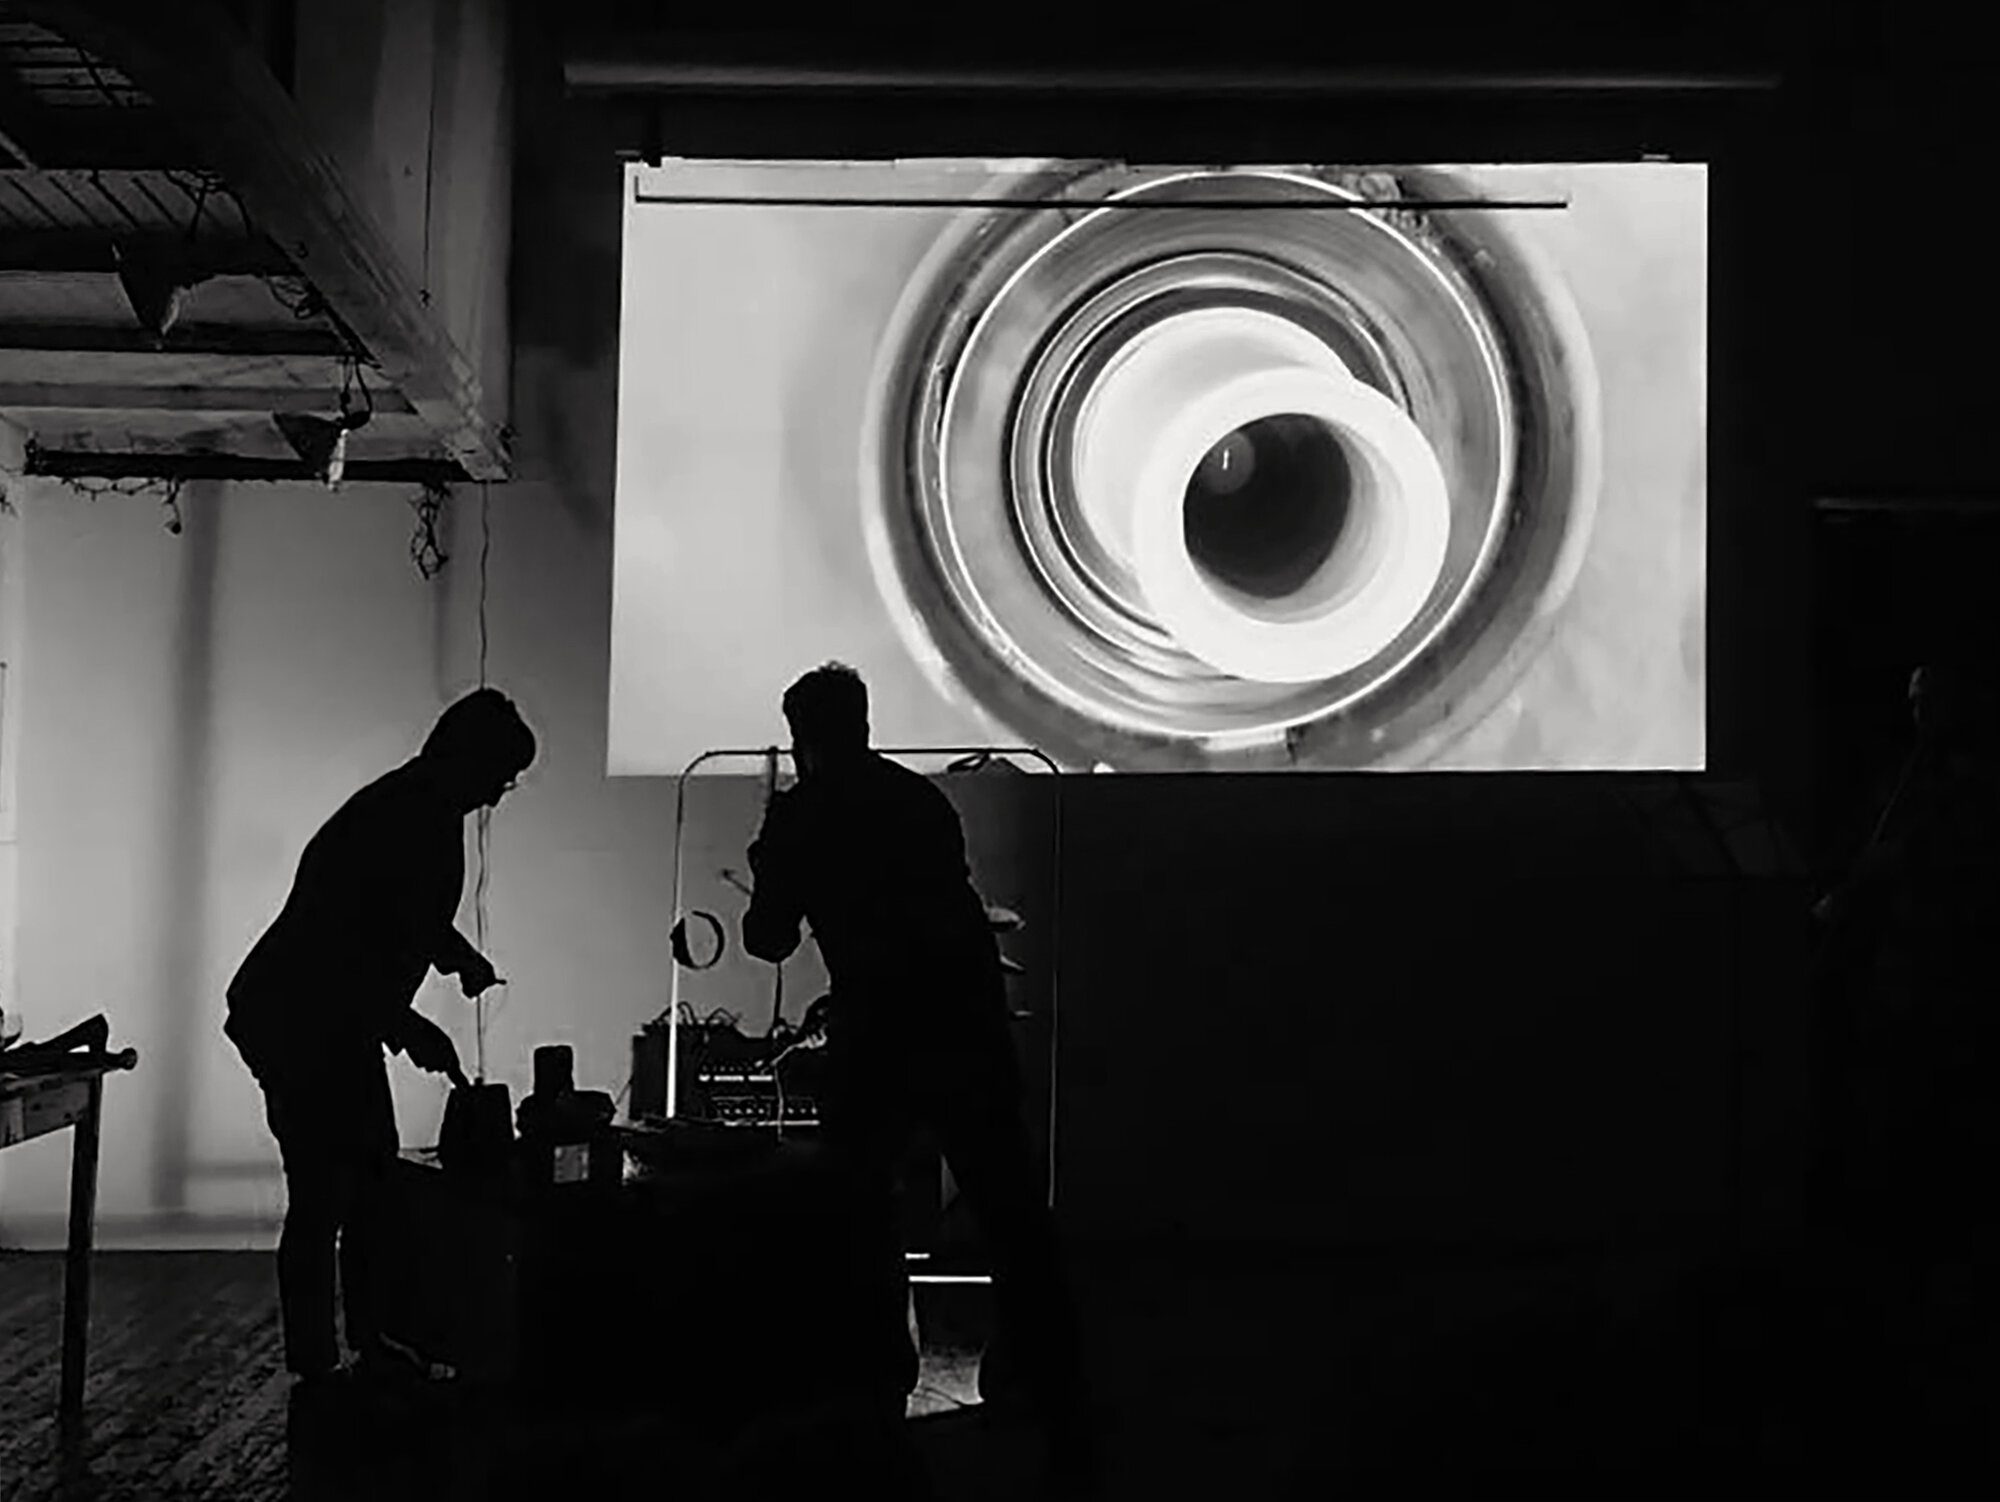   Vases and Hallucinations , performance, 2015, 5-minute projected movie with live sound from ceramics, percussion and Japanese shakuhachi flute, with Scott Hewicker and Steven Seidenberg. 